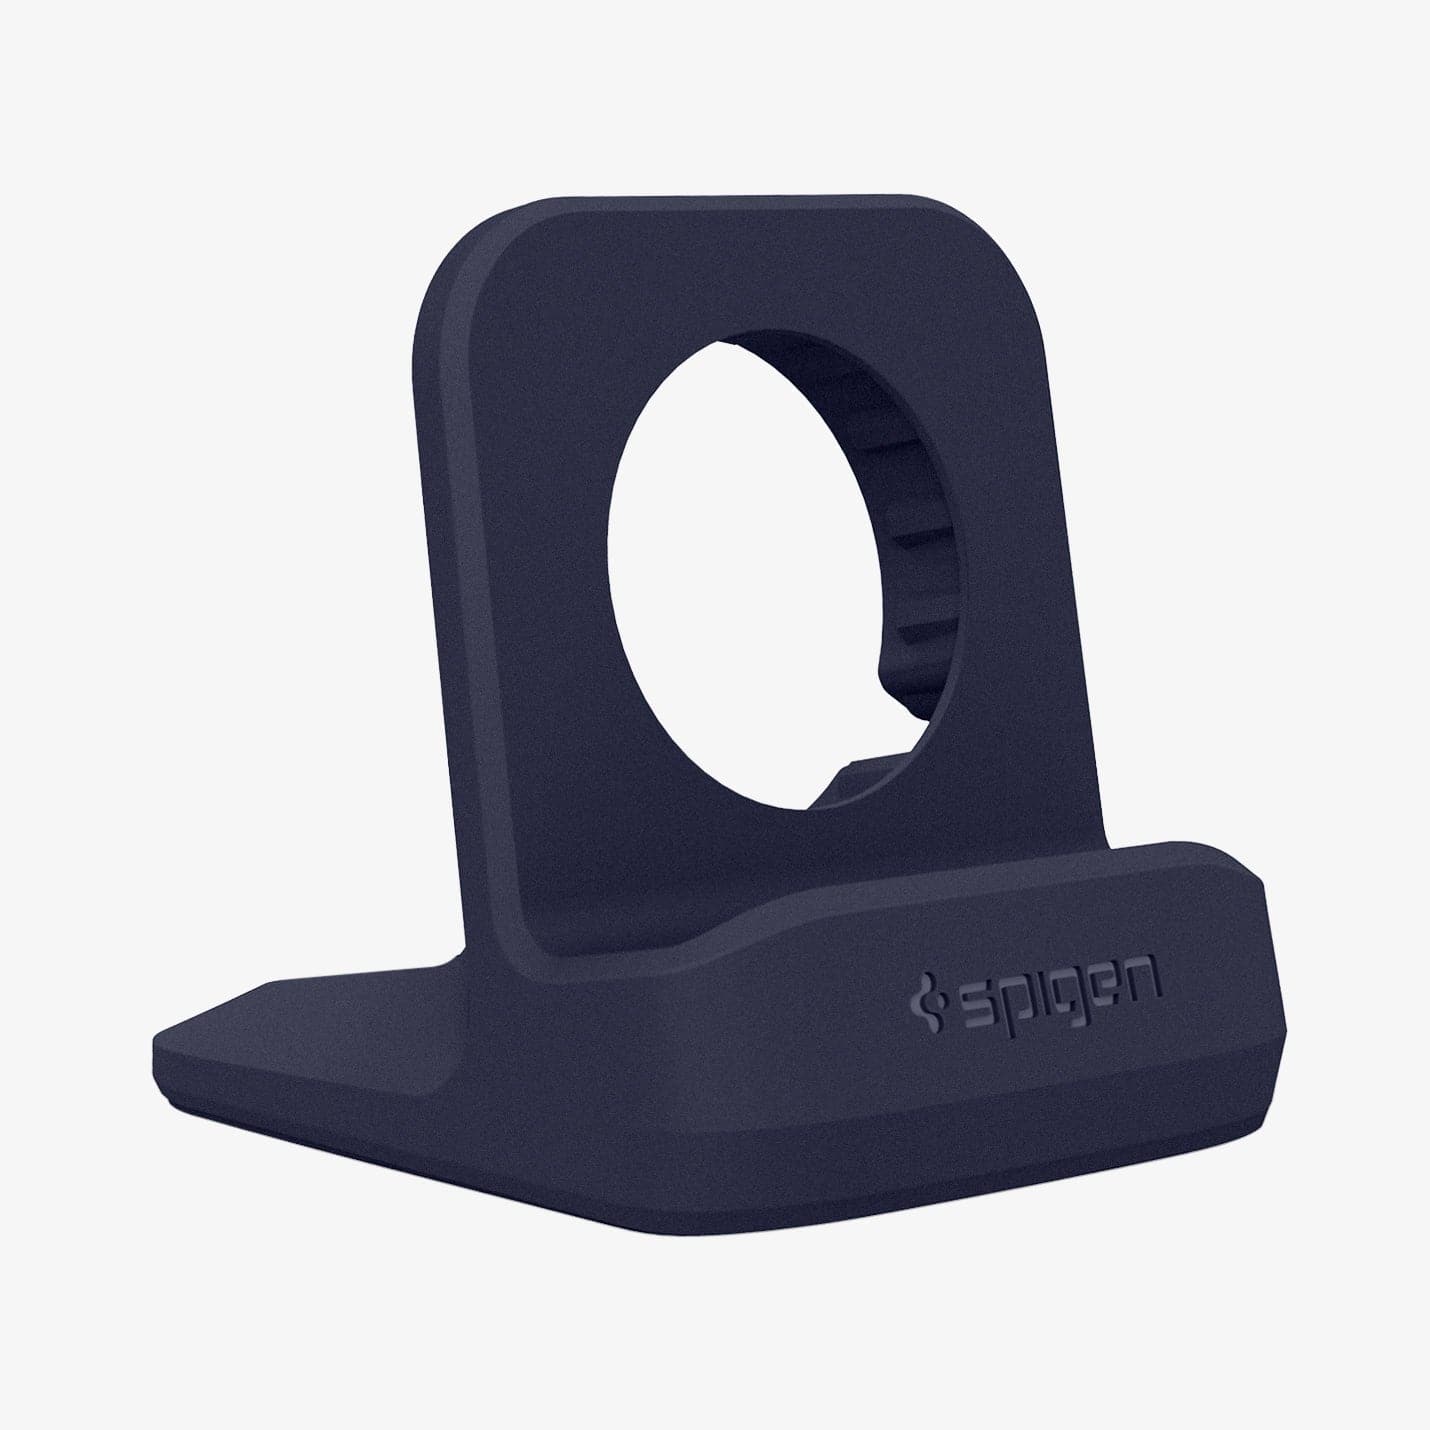 000CD21182 - Apple Watch Night Stand S350 in midnight blue showing the front and partial side